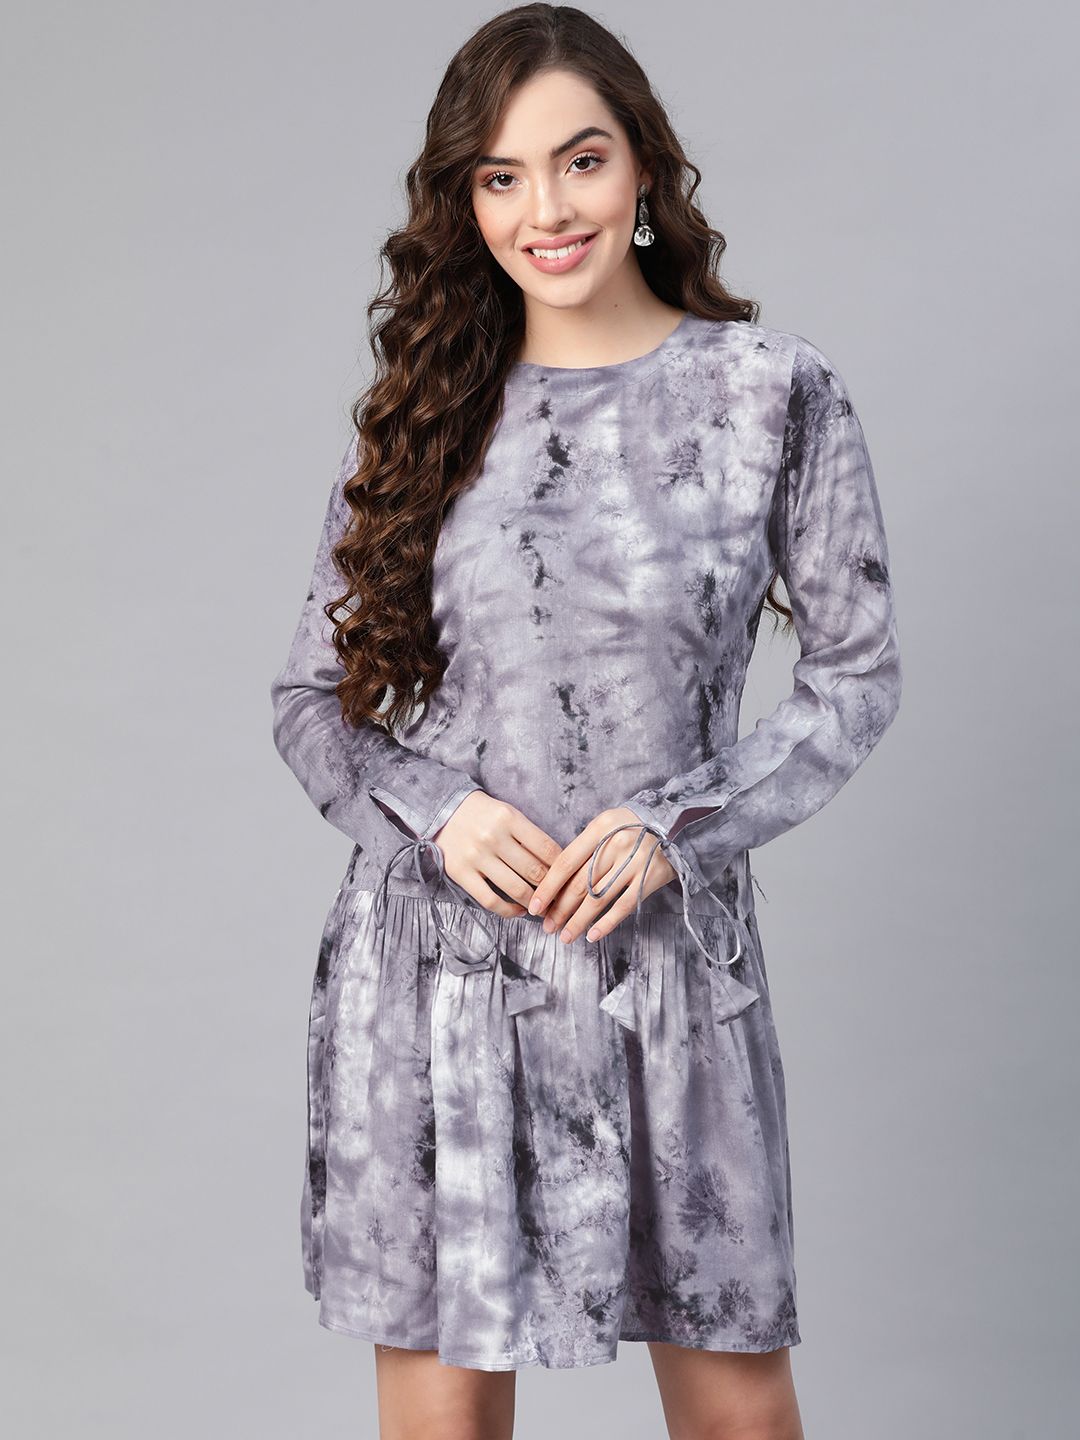 MBE Grey Tie and Dye Dyed Drop-Waist Dress Price in India